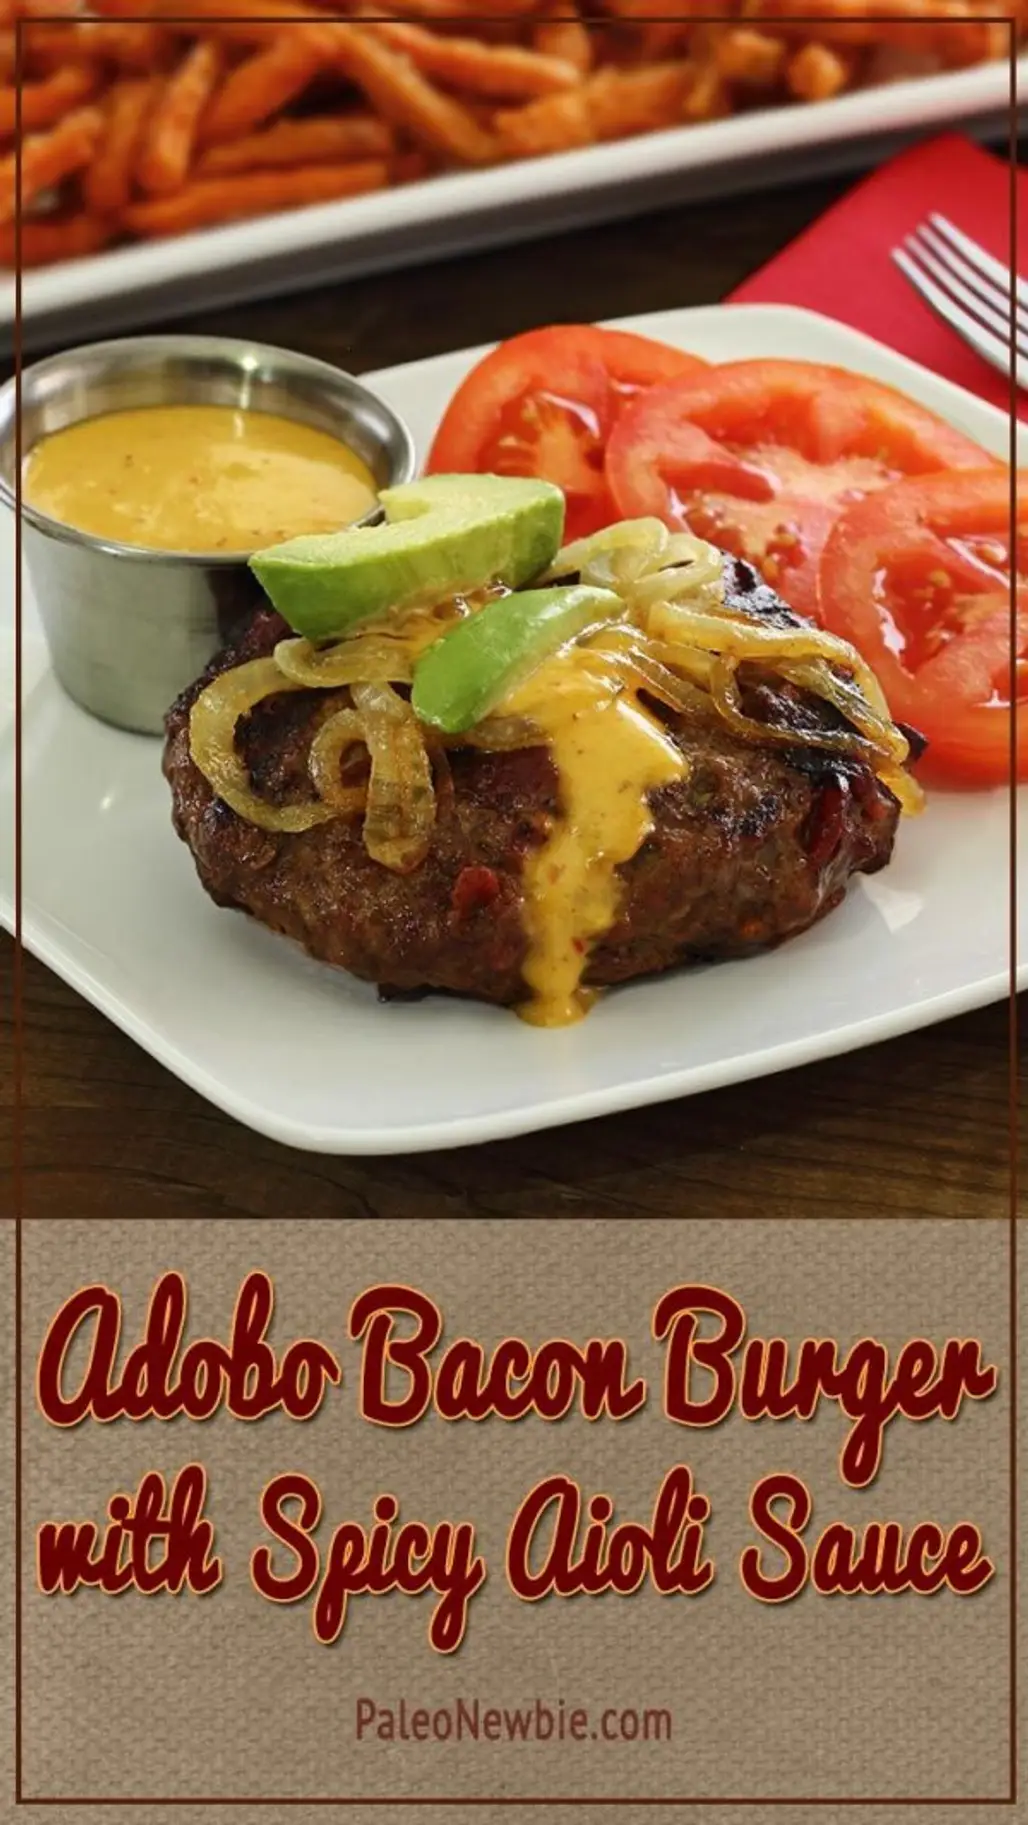 Gourmet Paleo Burger with Bacon and Chipotle-adobo inside